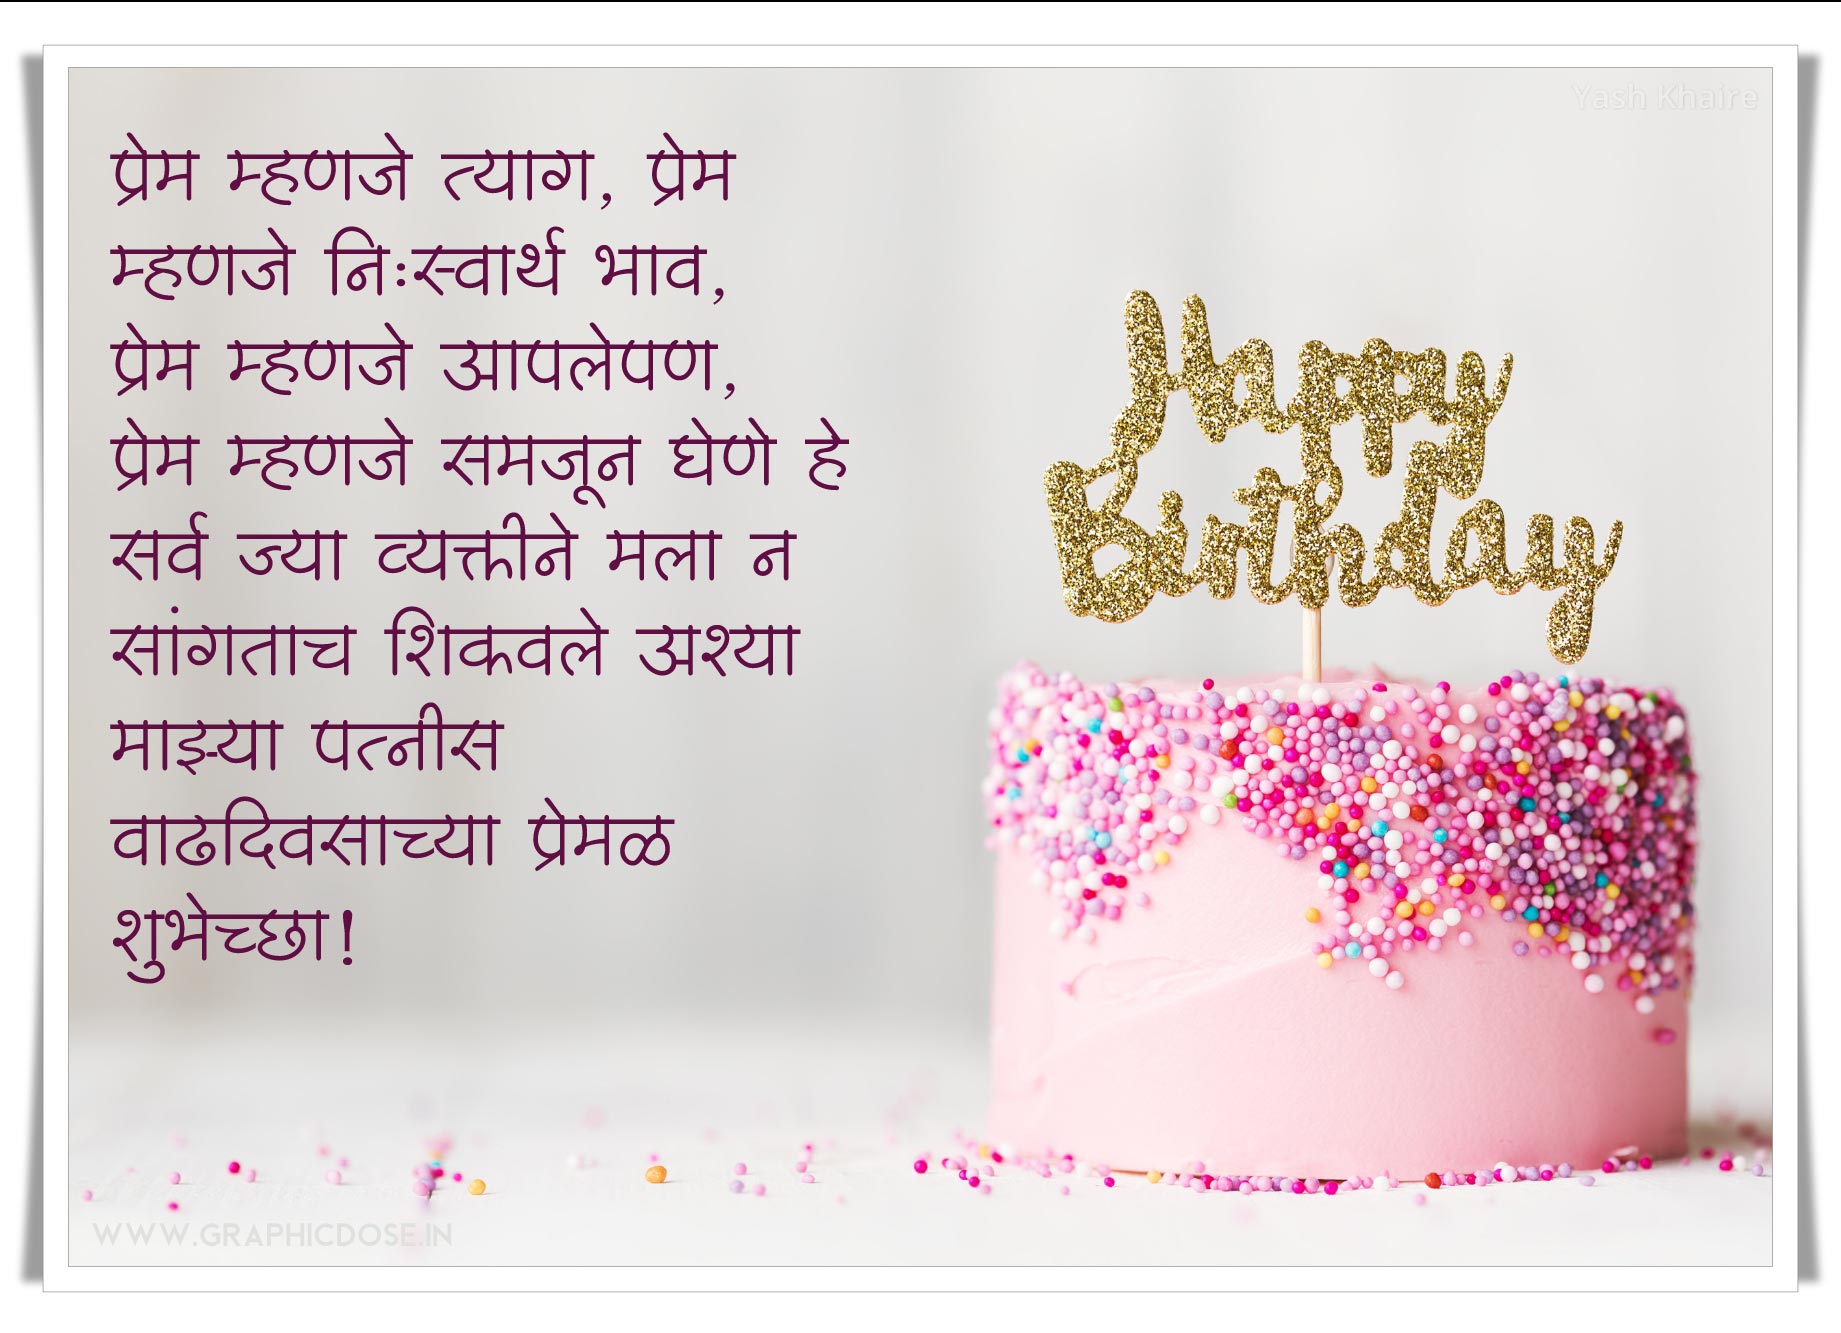 50-best-birthday-wishes-for-wife-in-marathi-graphic-dose